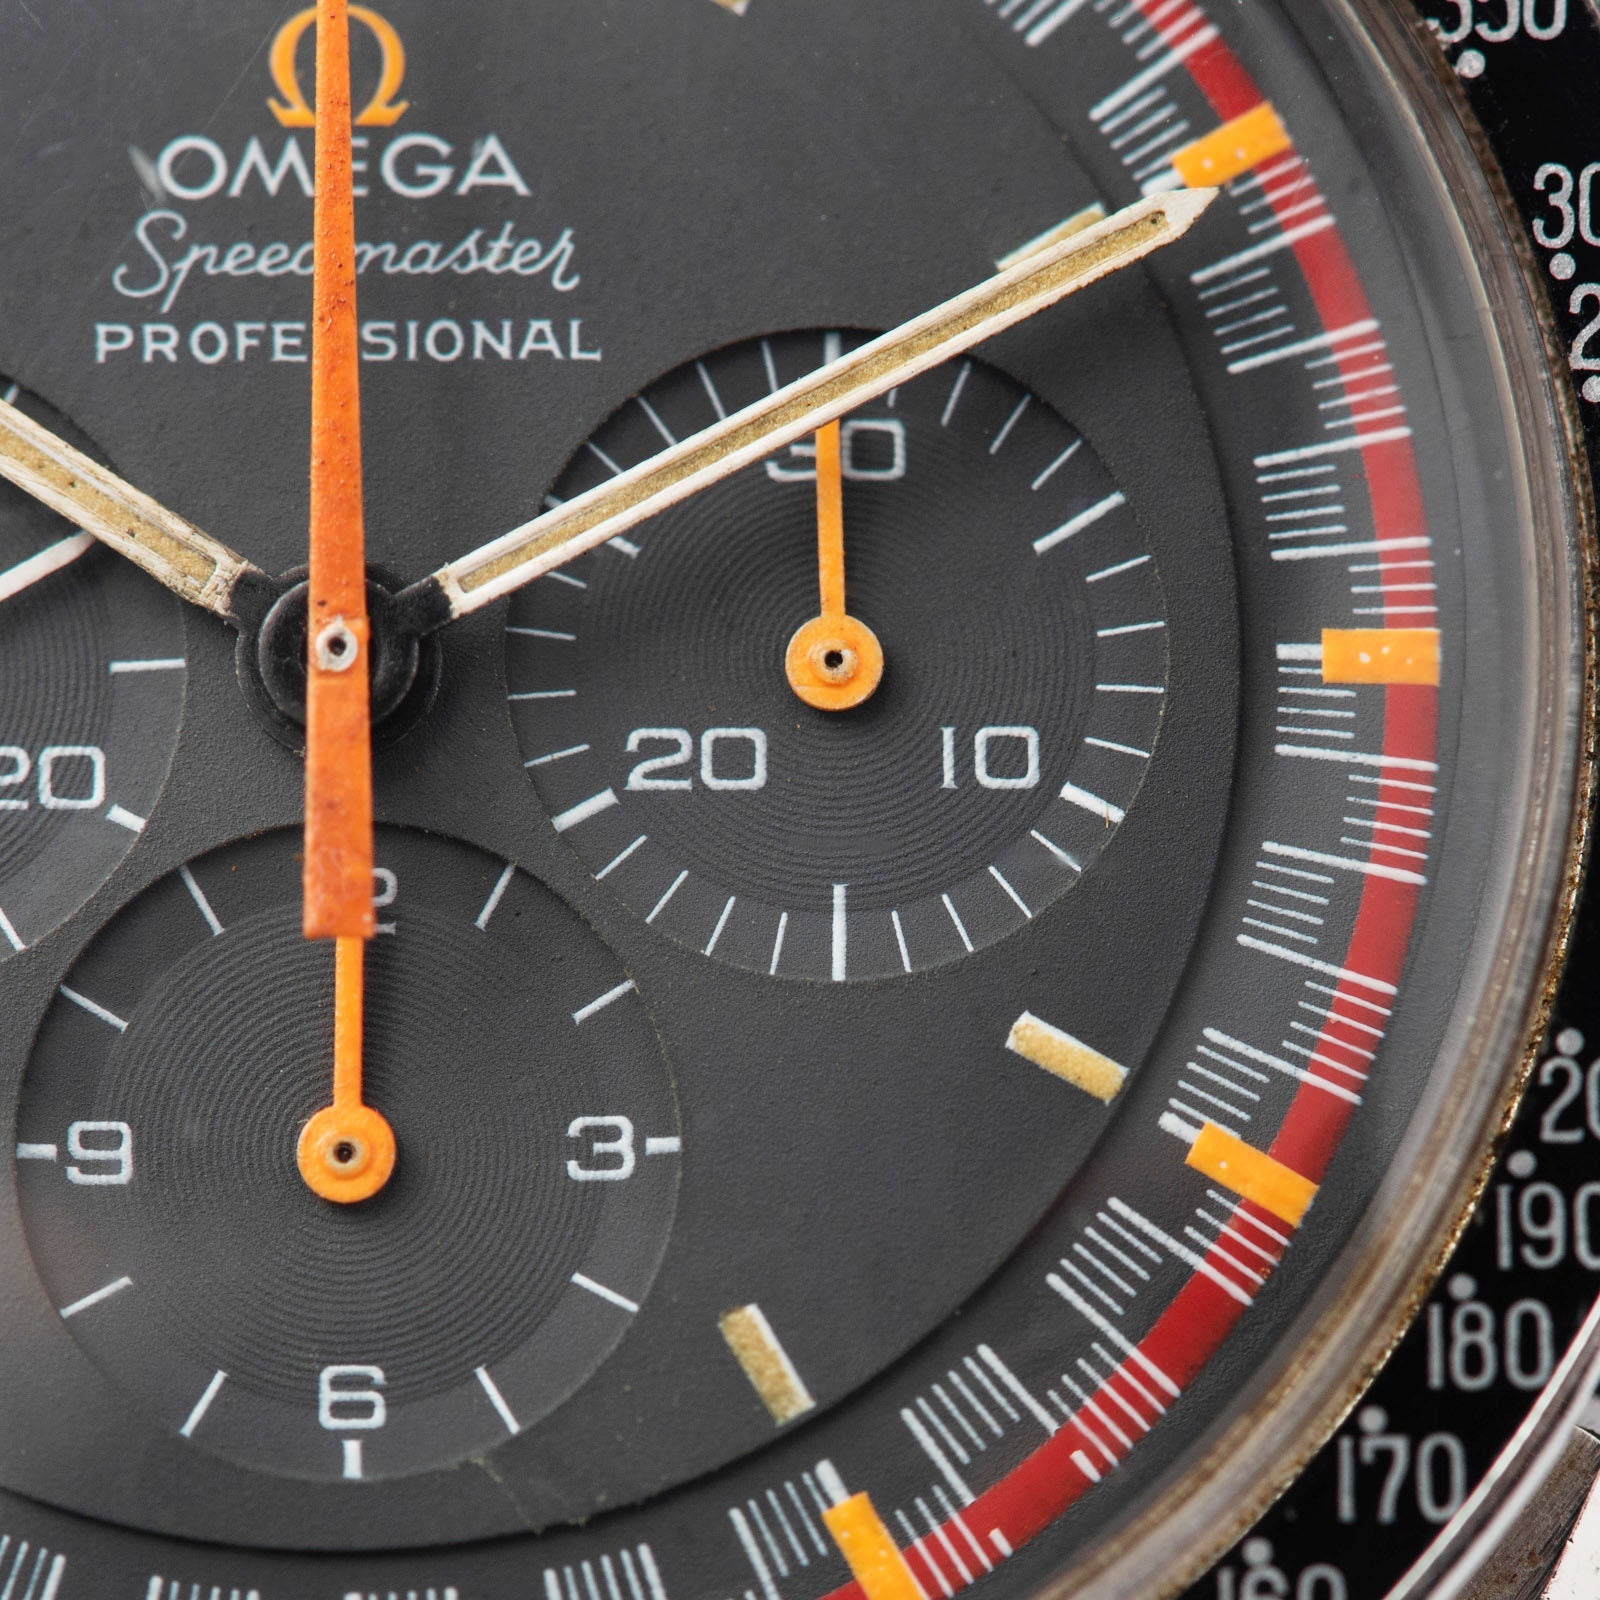 The Omega 145.022 Speedmaster Racing - A Rare and Iconic Speedy